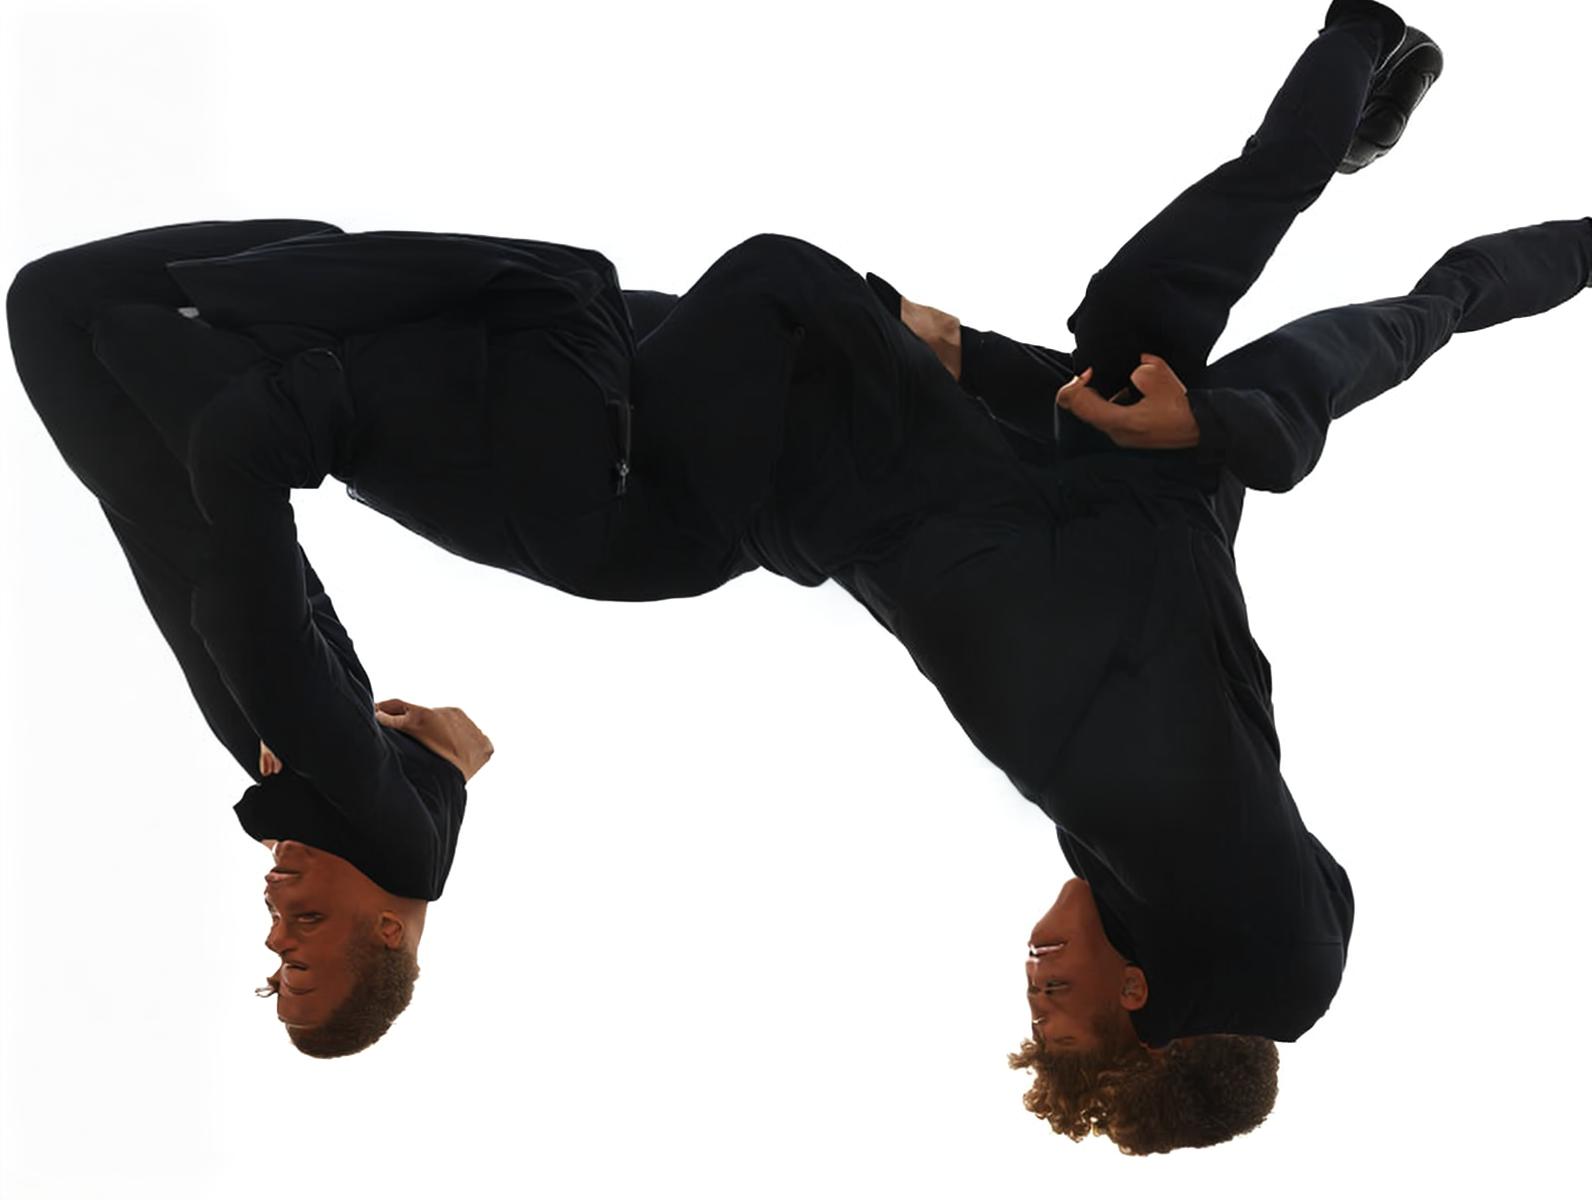  Ultra realistic side view of a young adult male person performing backflip, Canon EOS R3, f/1.4, symmetrical balance, rule of thirds, (professionally color graded), (centered image composition).